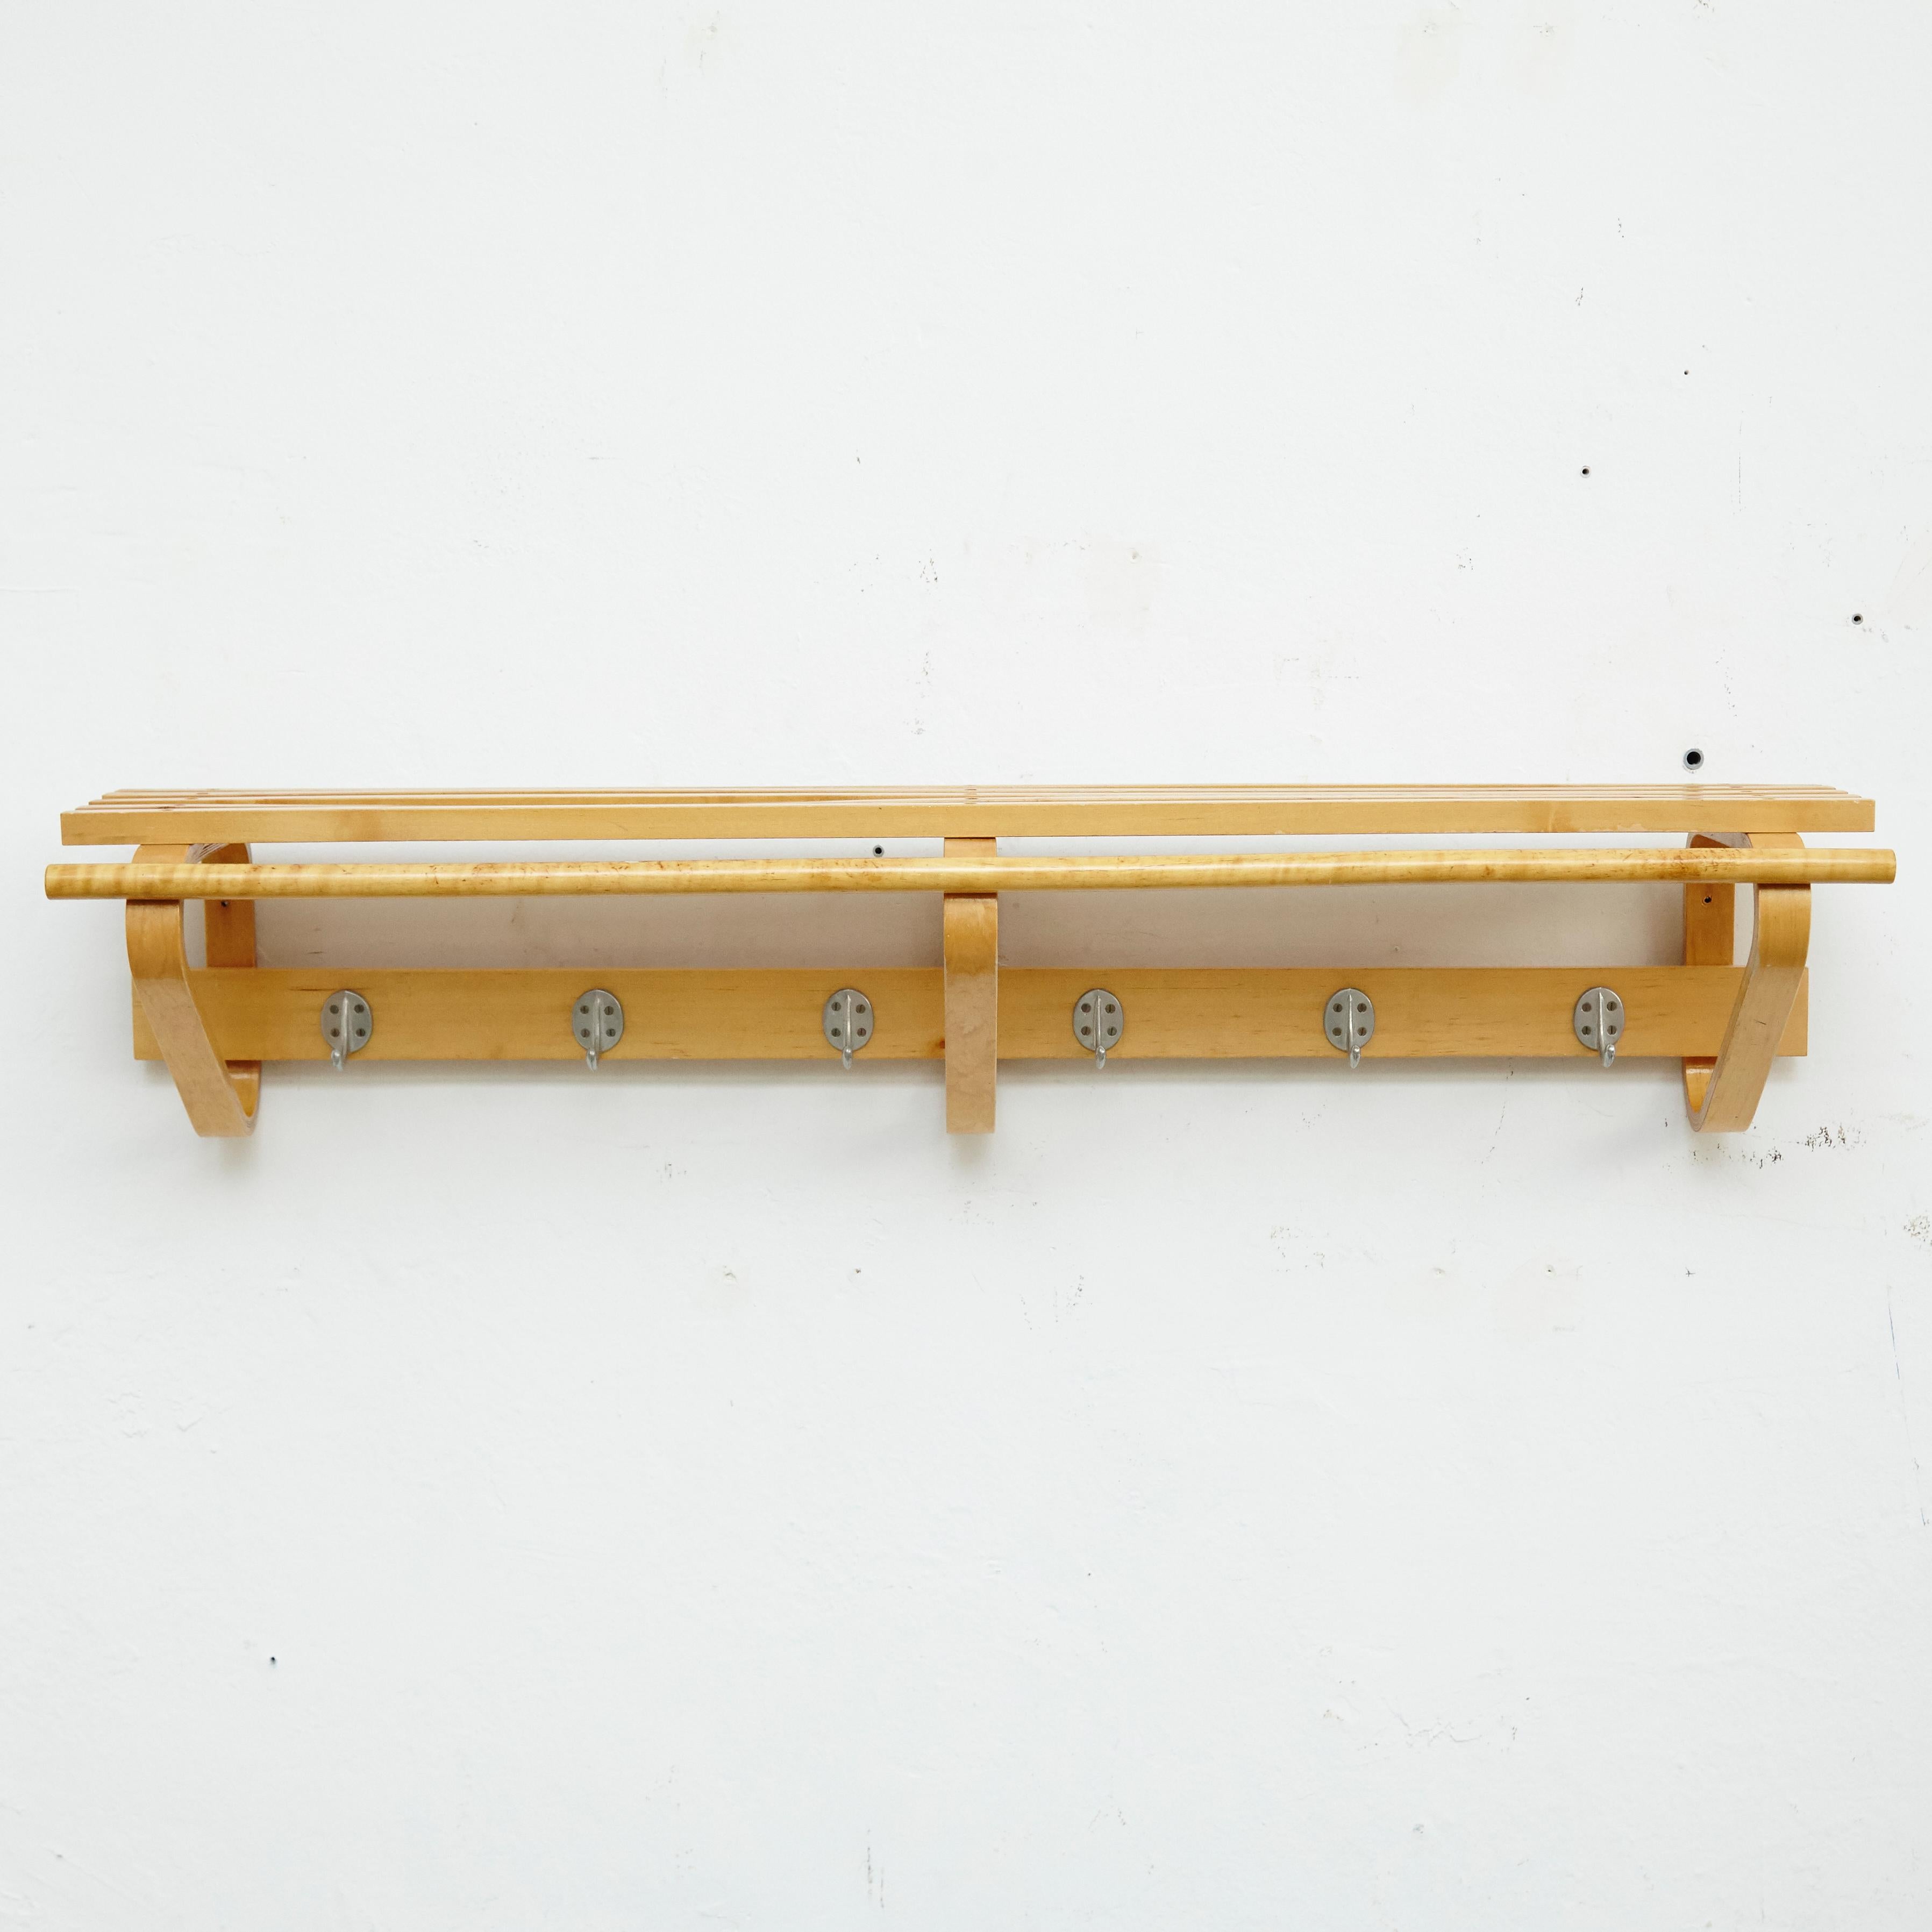 Coat rack designed by Alvar Aalto, circa 1950.
Manufactured by Artek (Finland).
Birch wood structure and nickel-plated hooks.

In great original condition, with minor wear consistent with age and use, preserving a beautiful patina.

Hugo Alvar